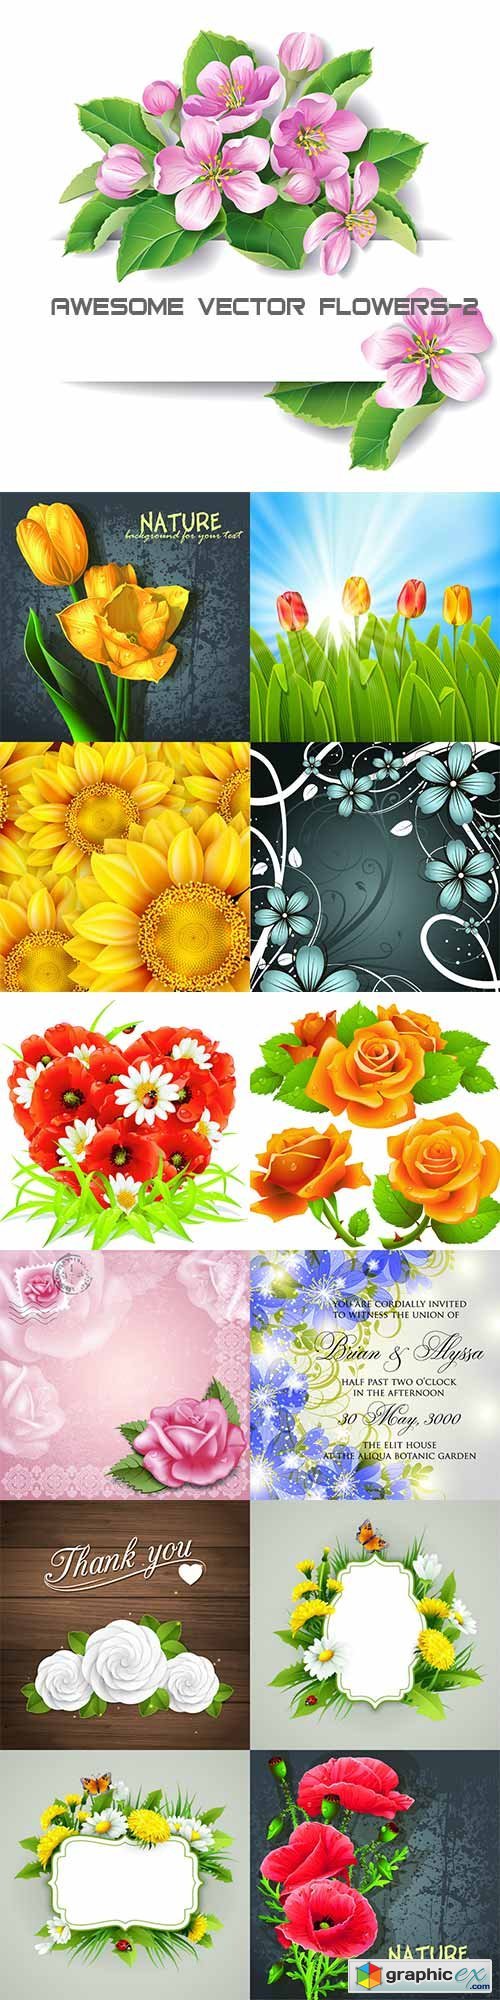 Awesome vector flowers-2